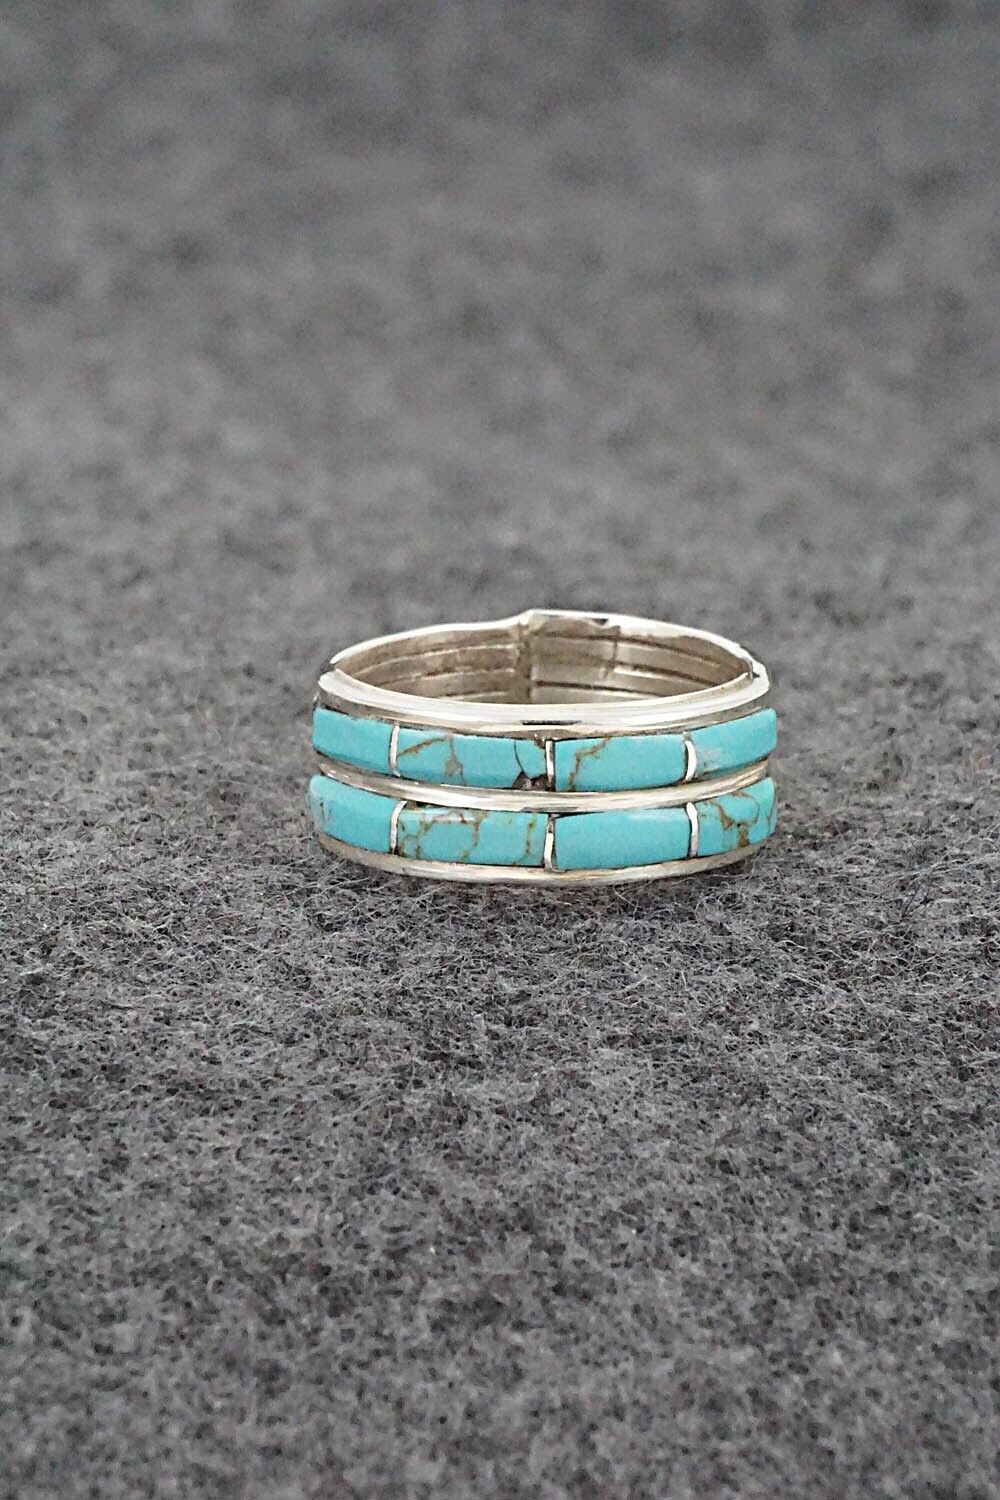 Turquoise & Sterling Silver Ring - Debbie Livingston - Size 7.5